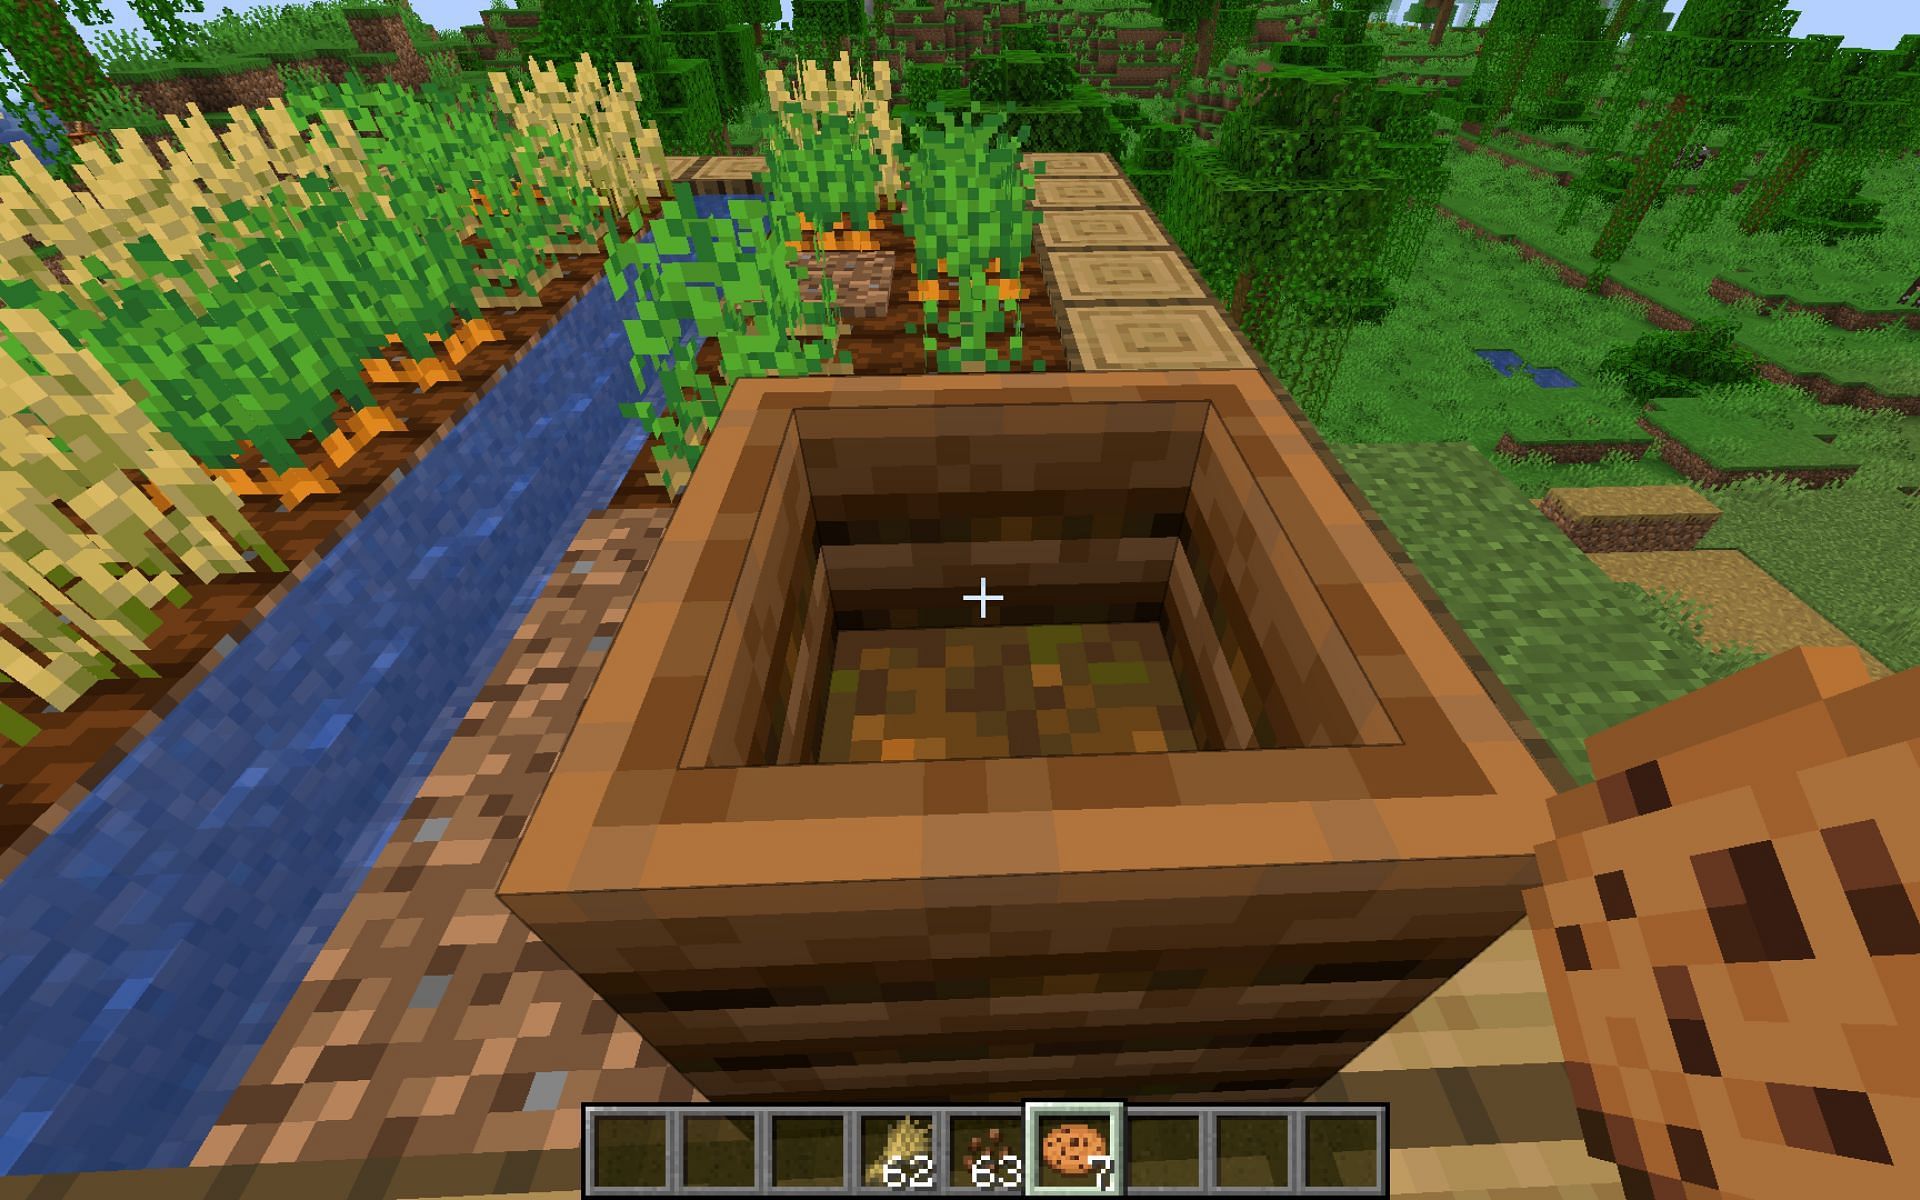 There are all kinds of biodegradable items that can be dumped in the composter (Image via Minecraft 1.19 update)